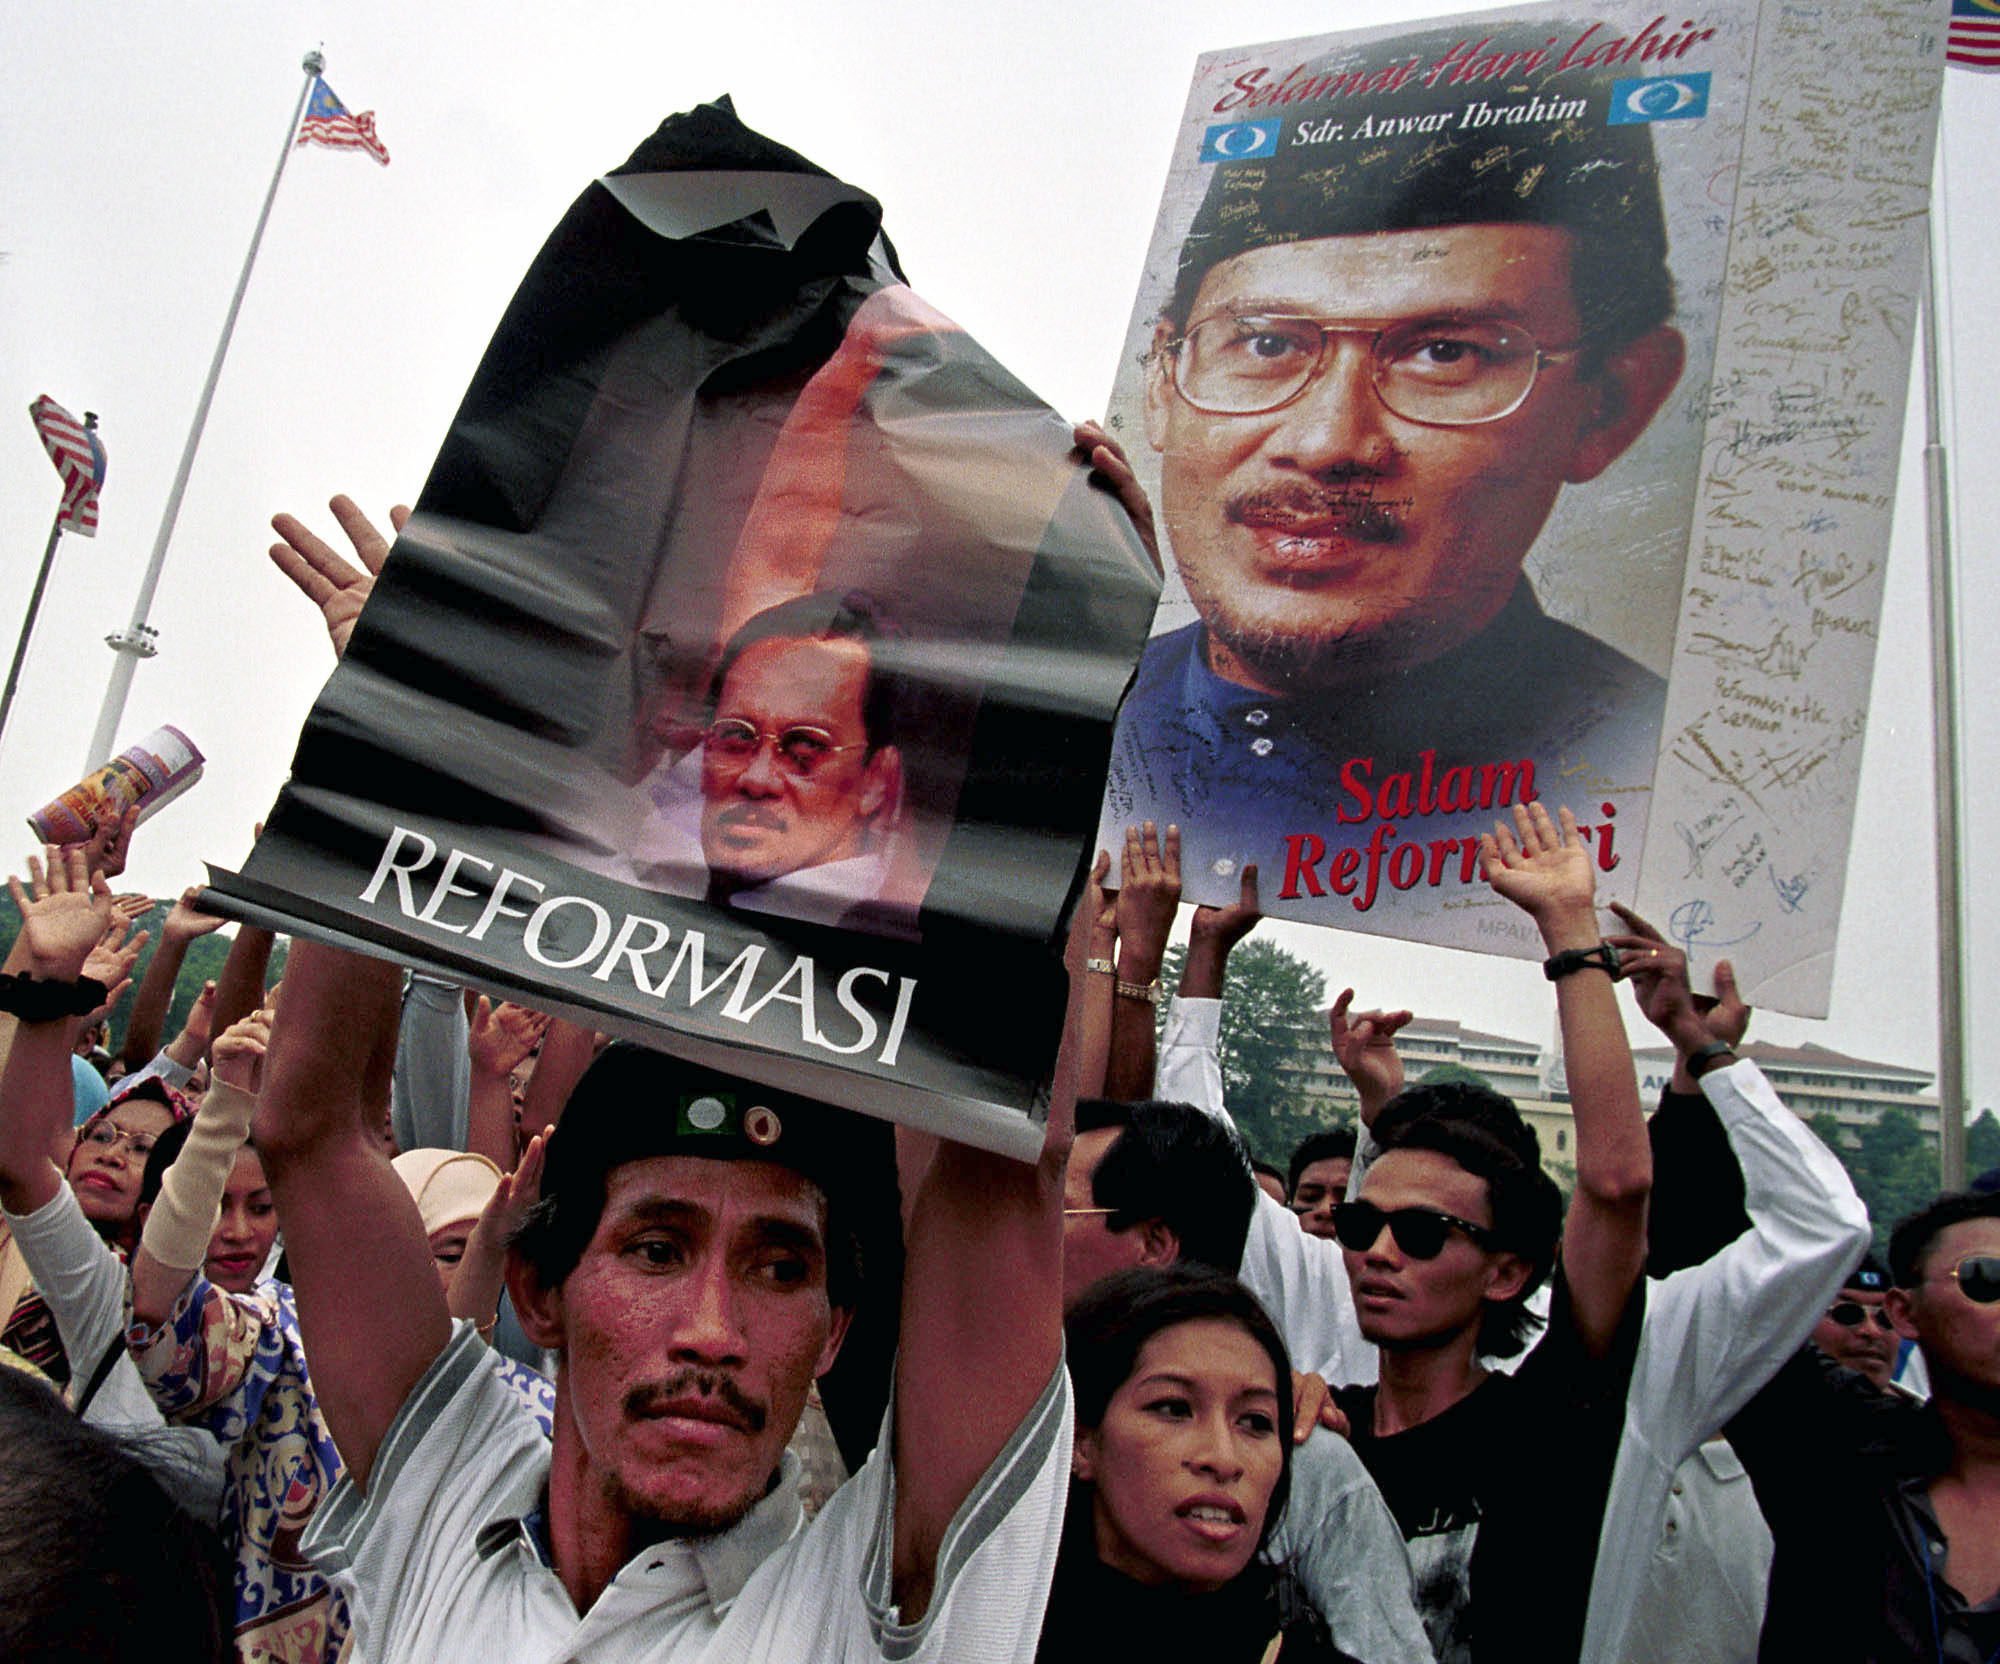 Supporters of Anwar Ibrahim, Malaysia ousted deputy prime minister, hold “Reformasi” posters during a rally in August 1999 in Kuala Lumpur. File photo: AP